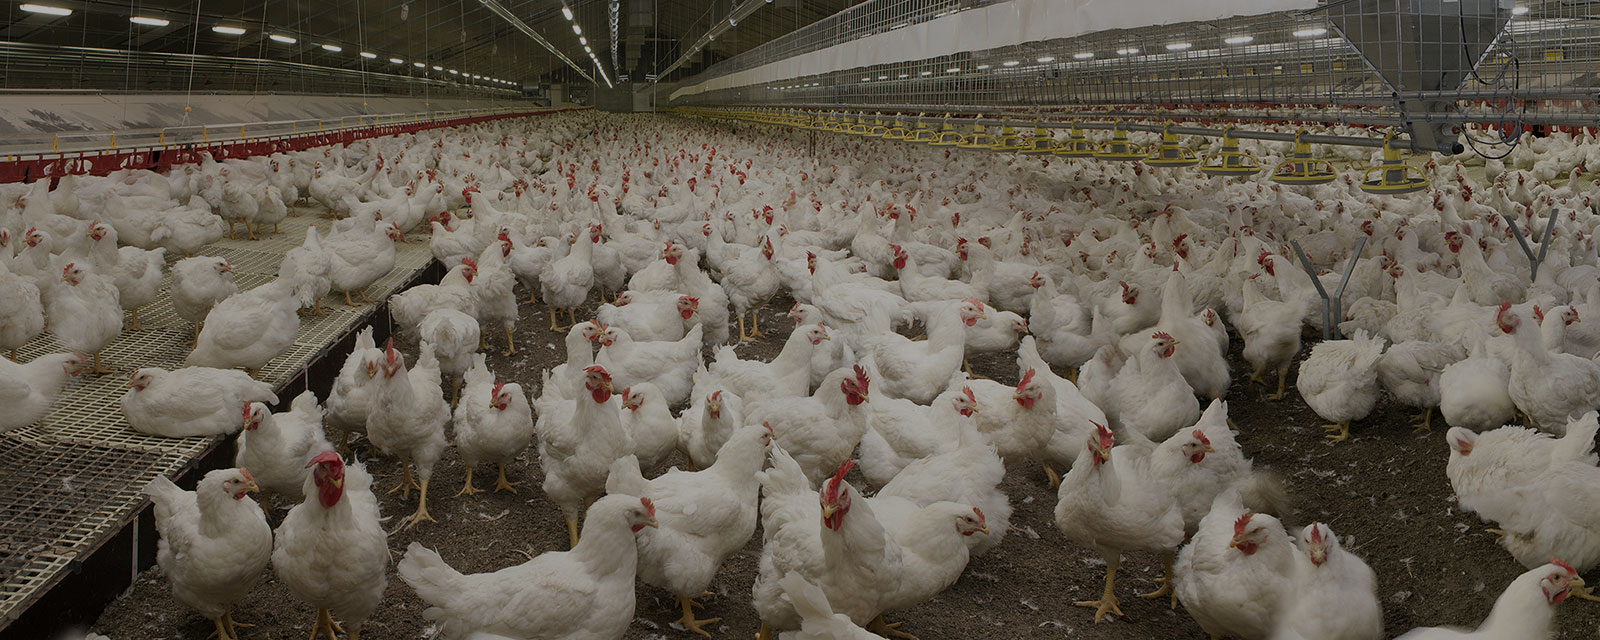 Rosehill Poultry | About